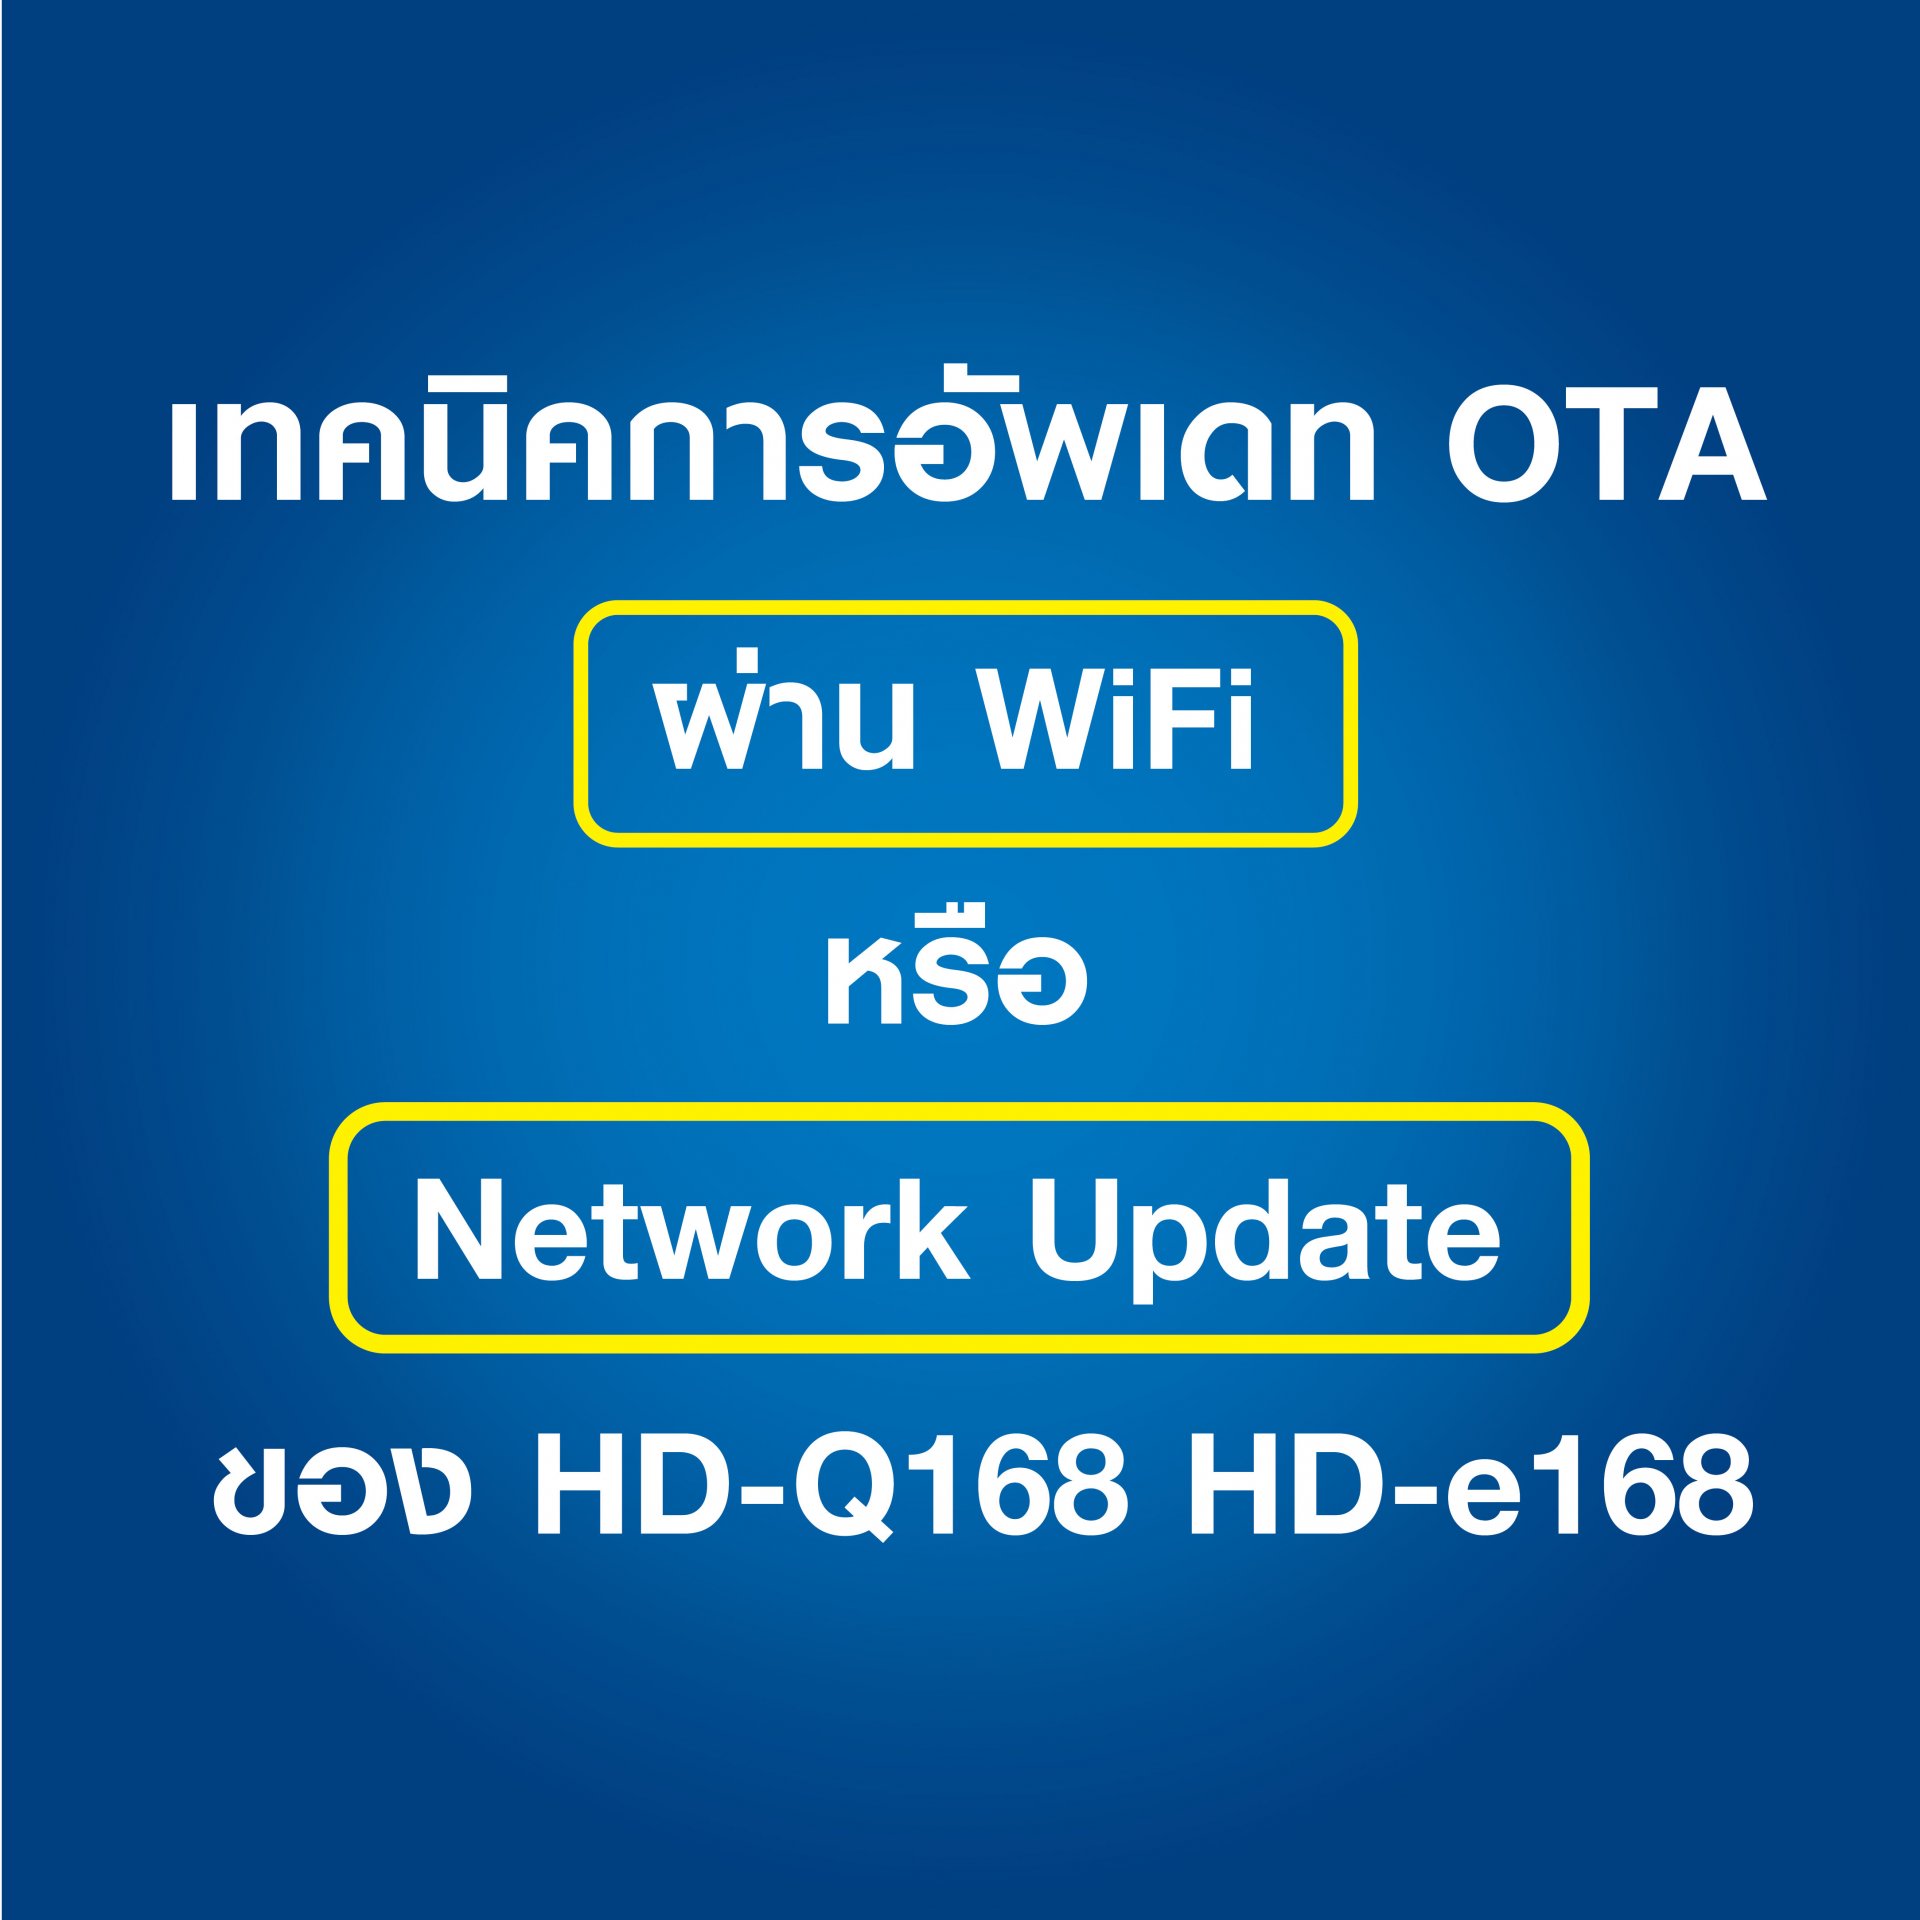 Techniques for updating OTA via WiFi or updating the network of the HD-Q168 HD-e168.